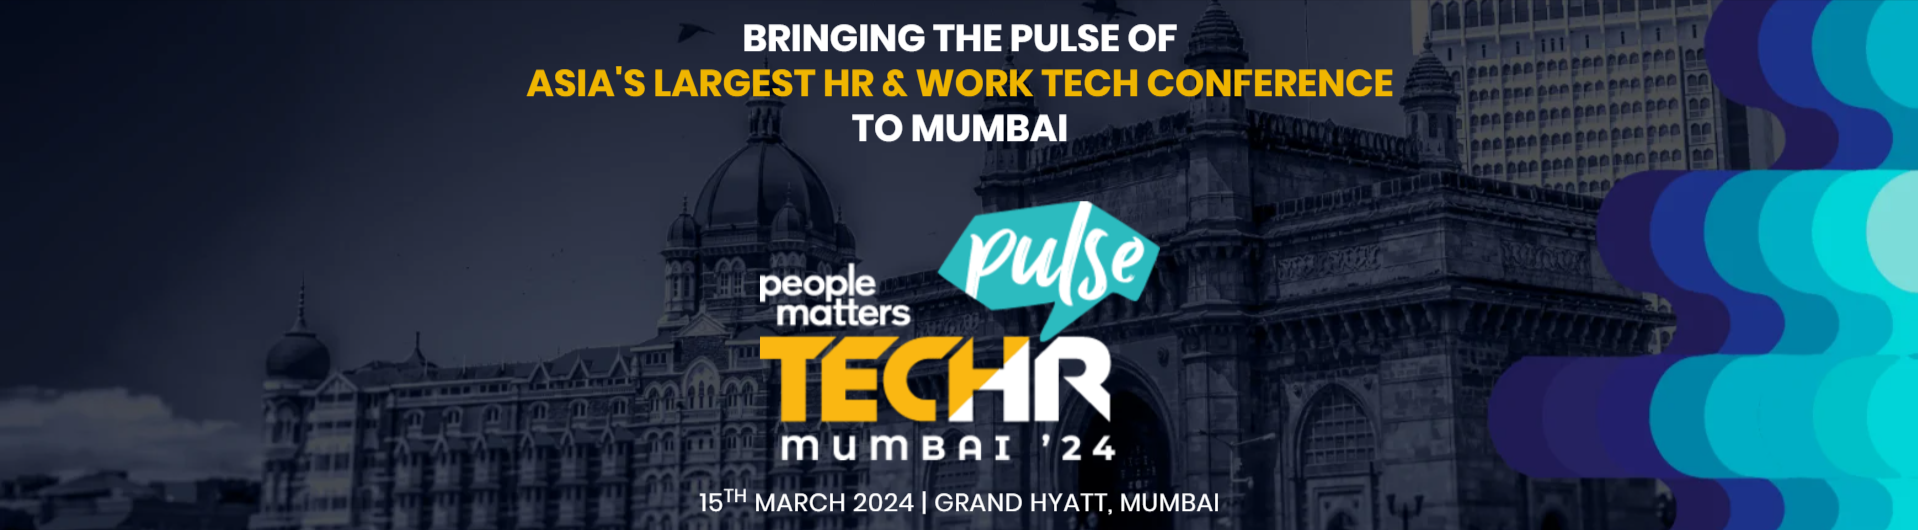 People-Matters-TechHR-Pulse-Mumbai-Conference-2024 (1).png